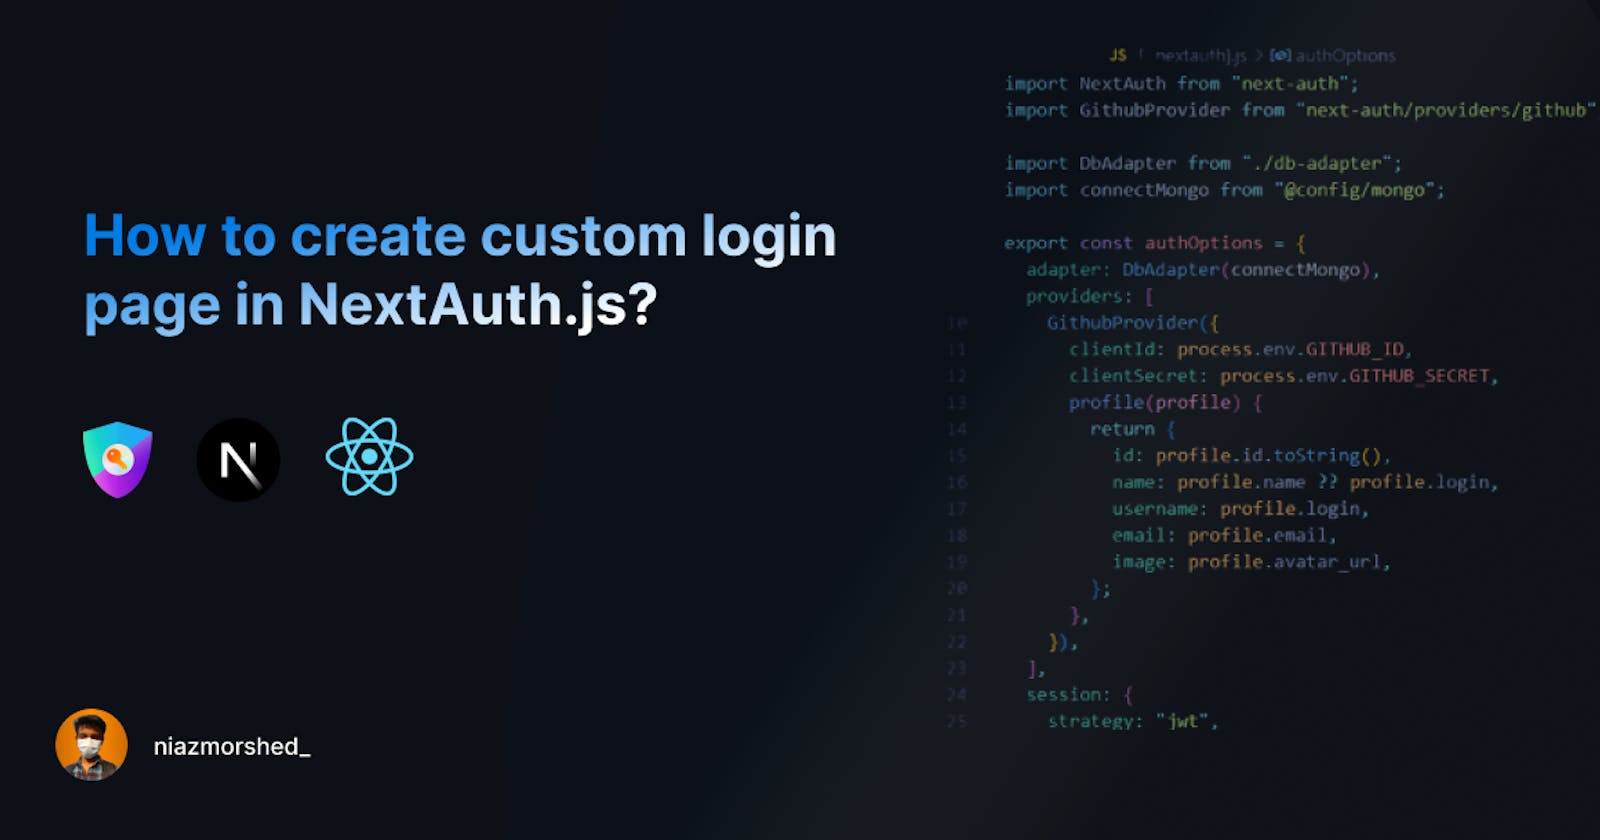 How to create a custom login page in NextAuth.js?